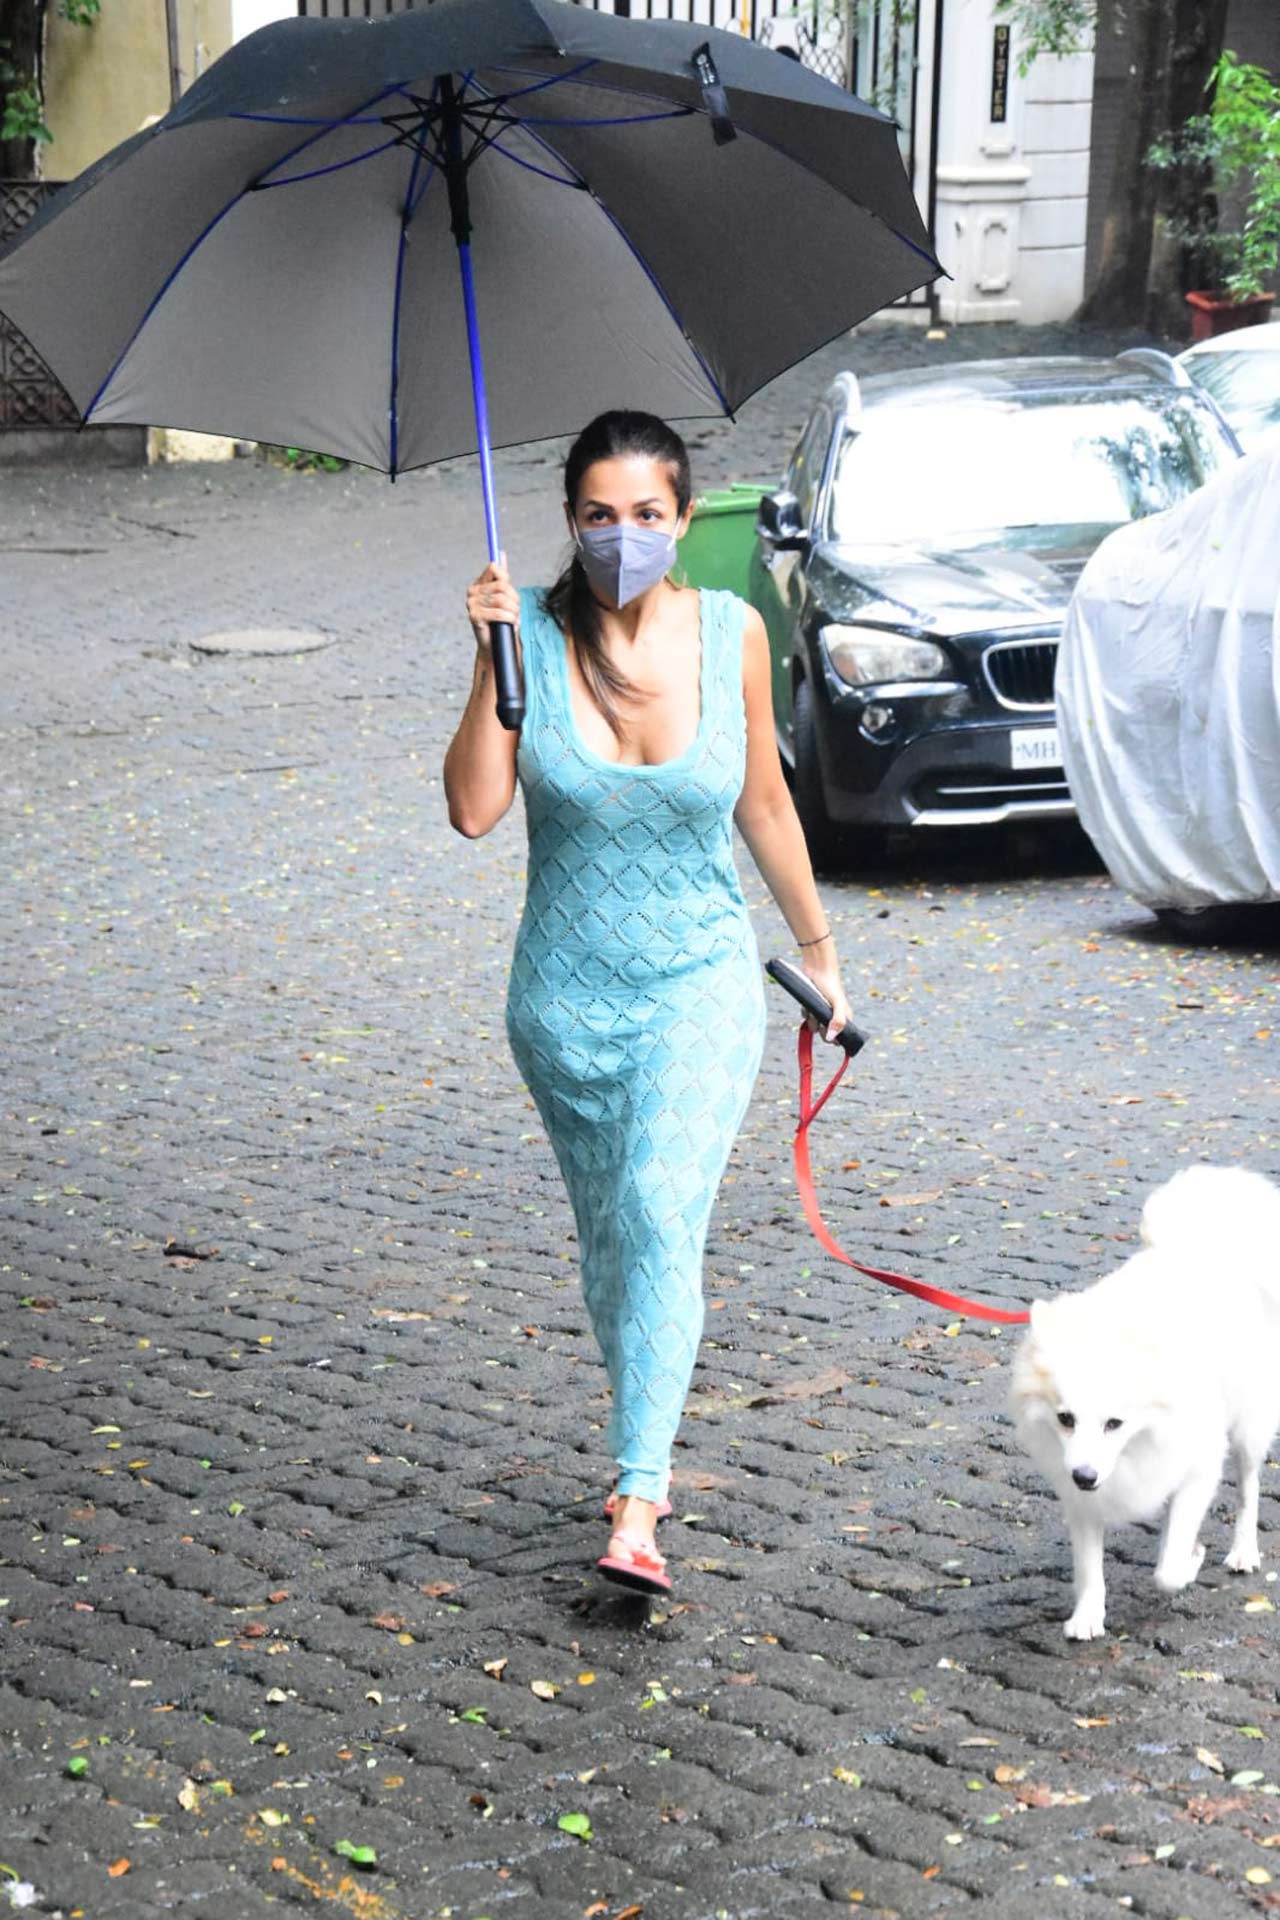 Malaika Arora stunned in a blue maxi dress as she stepped out to walk her pet on a rainy day in Mumbai. The actress opted for flip-flop slippers to complete her casual look.